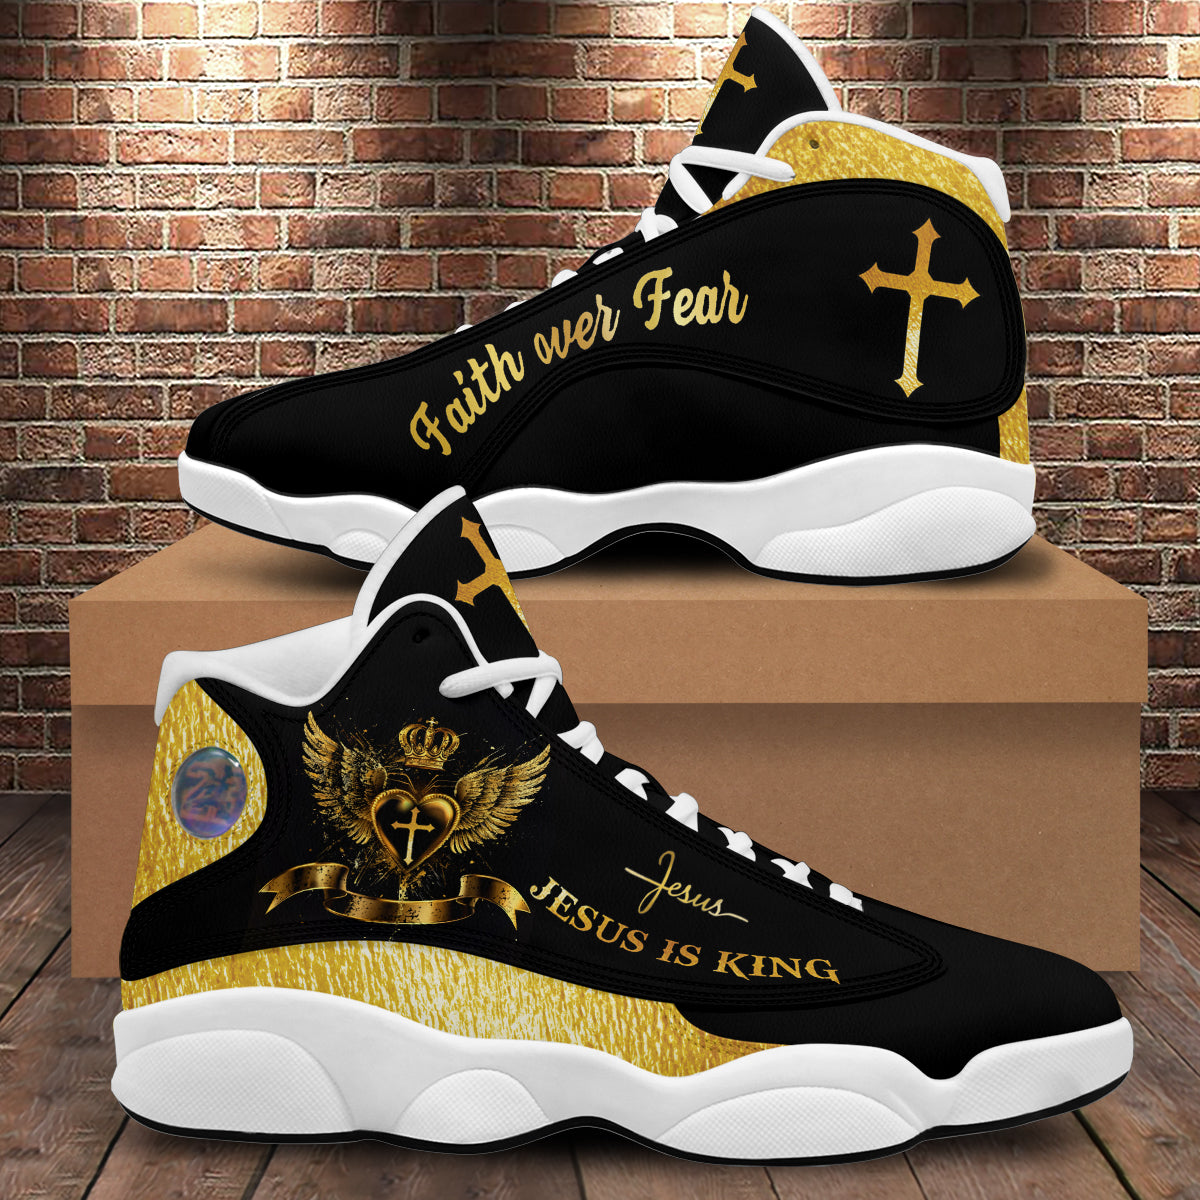 Teesdily | Jesus Christ Basketball Shoes, Jesus Is The King Basketball Shoes, Jesus Cross Art, Gift For Jesus Lovers, Christian Running Shoes,  Unisex Basketball Shoes With Thick Soles